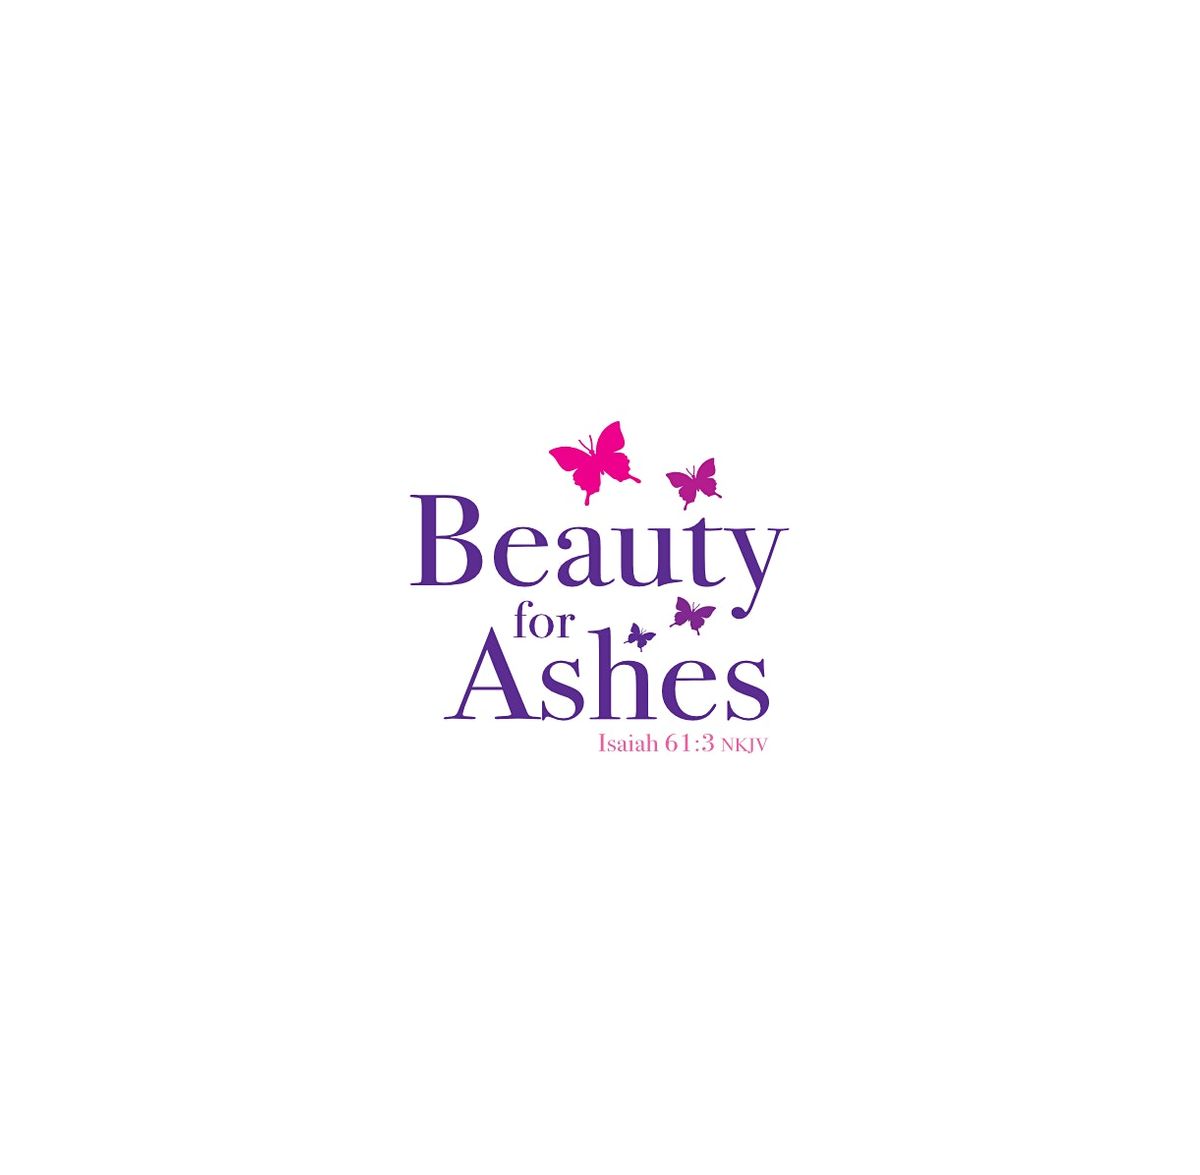 Beauty For Ashes